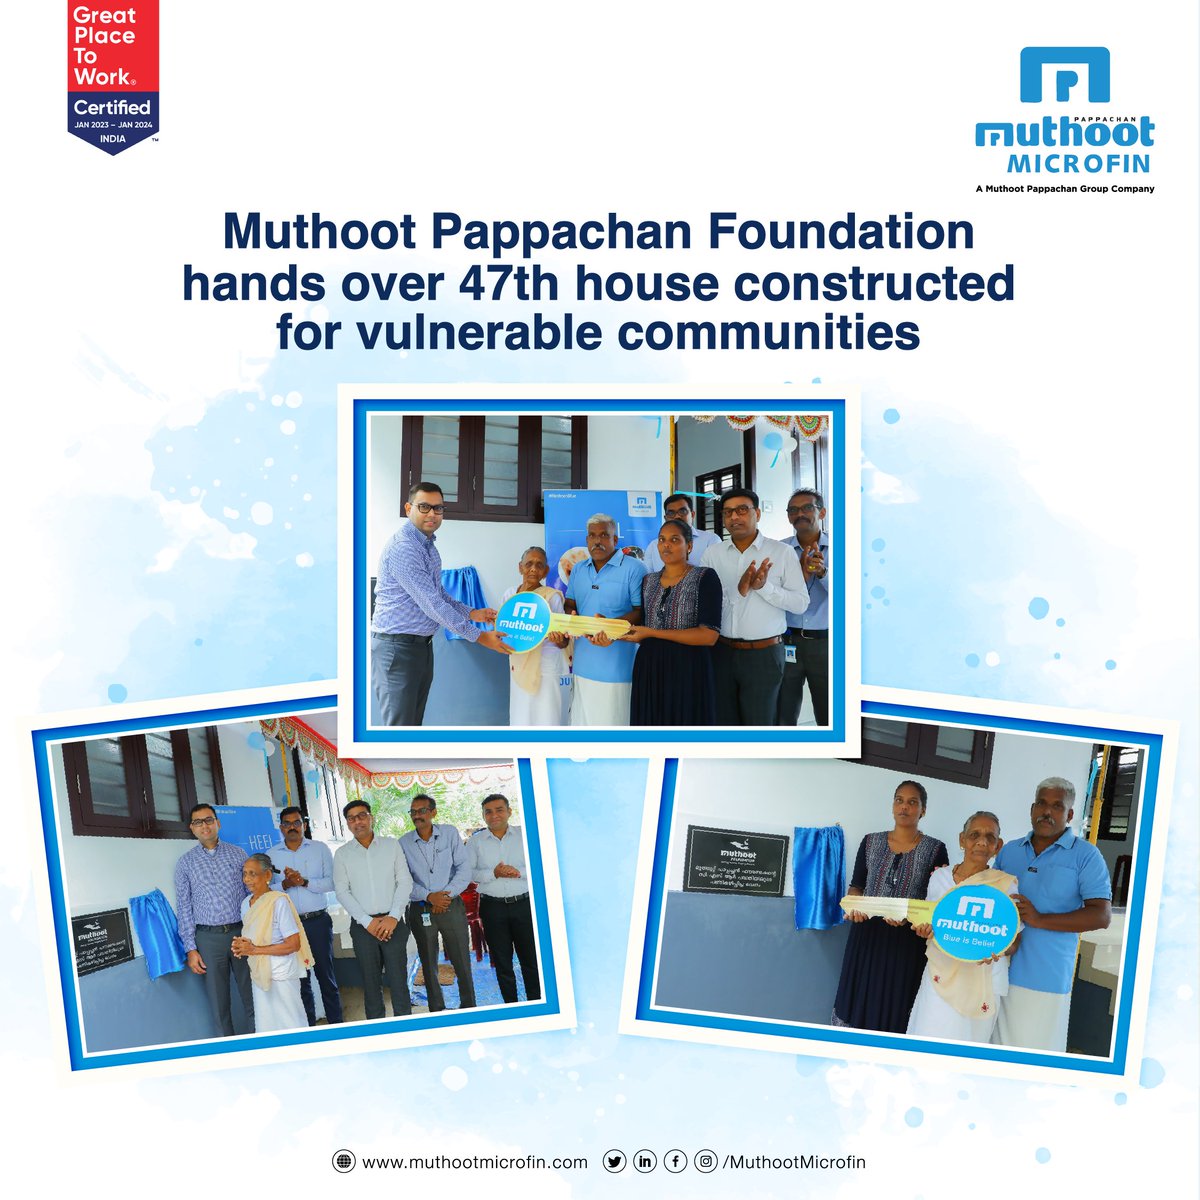 Our CEO, Mr. @SadafSayeed, presented the key to the family in a special ceremony at their new home. @MuthootIndia  #EmpoweringCommunities #MuthootPappachanGroup #MuthootBlue #BlueSoch
(3/3)